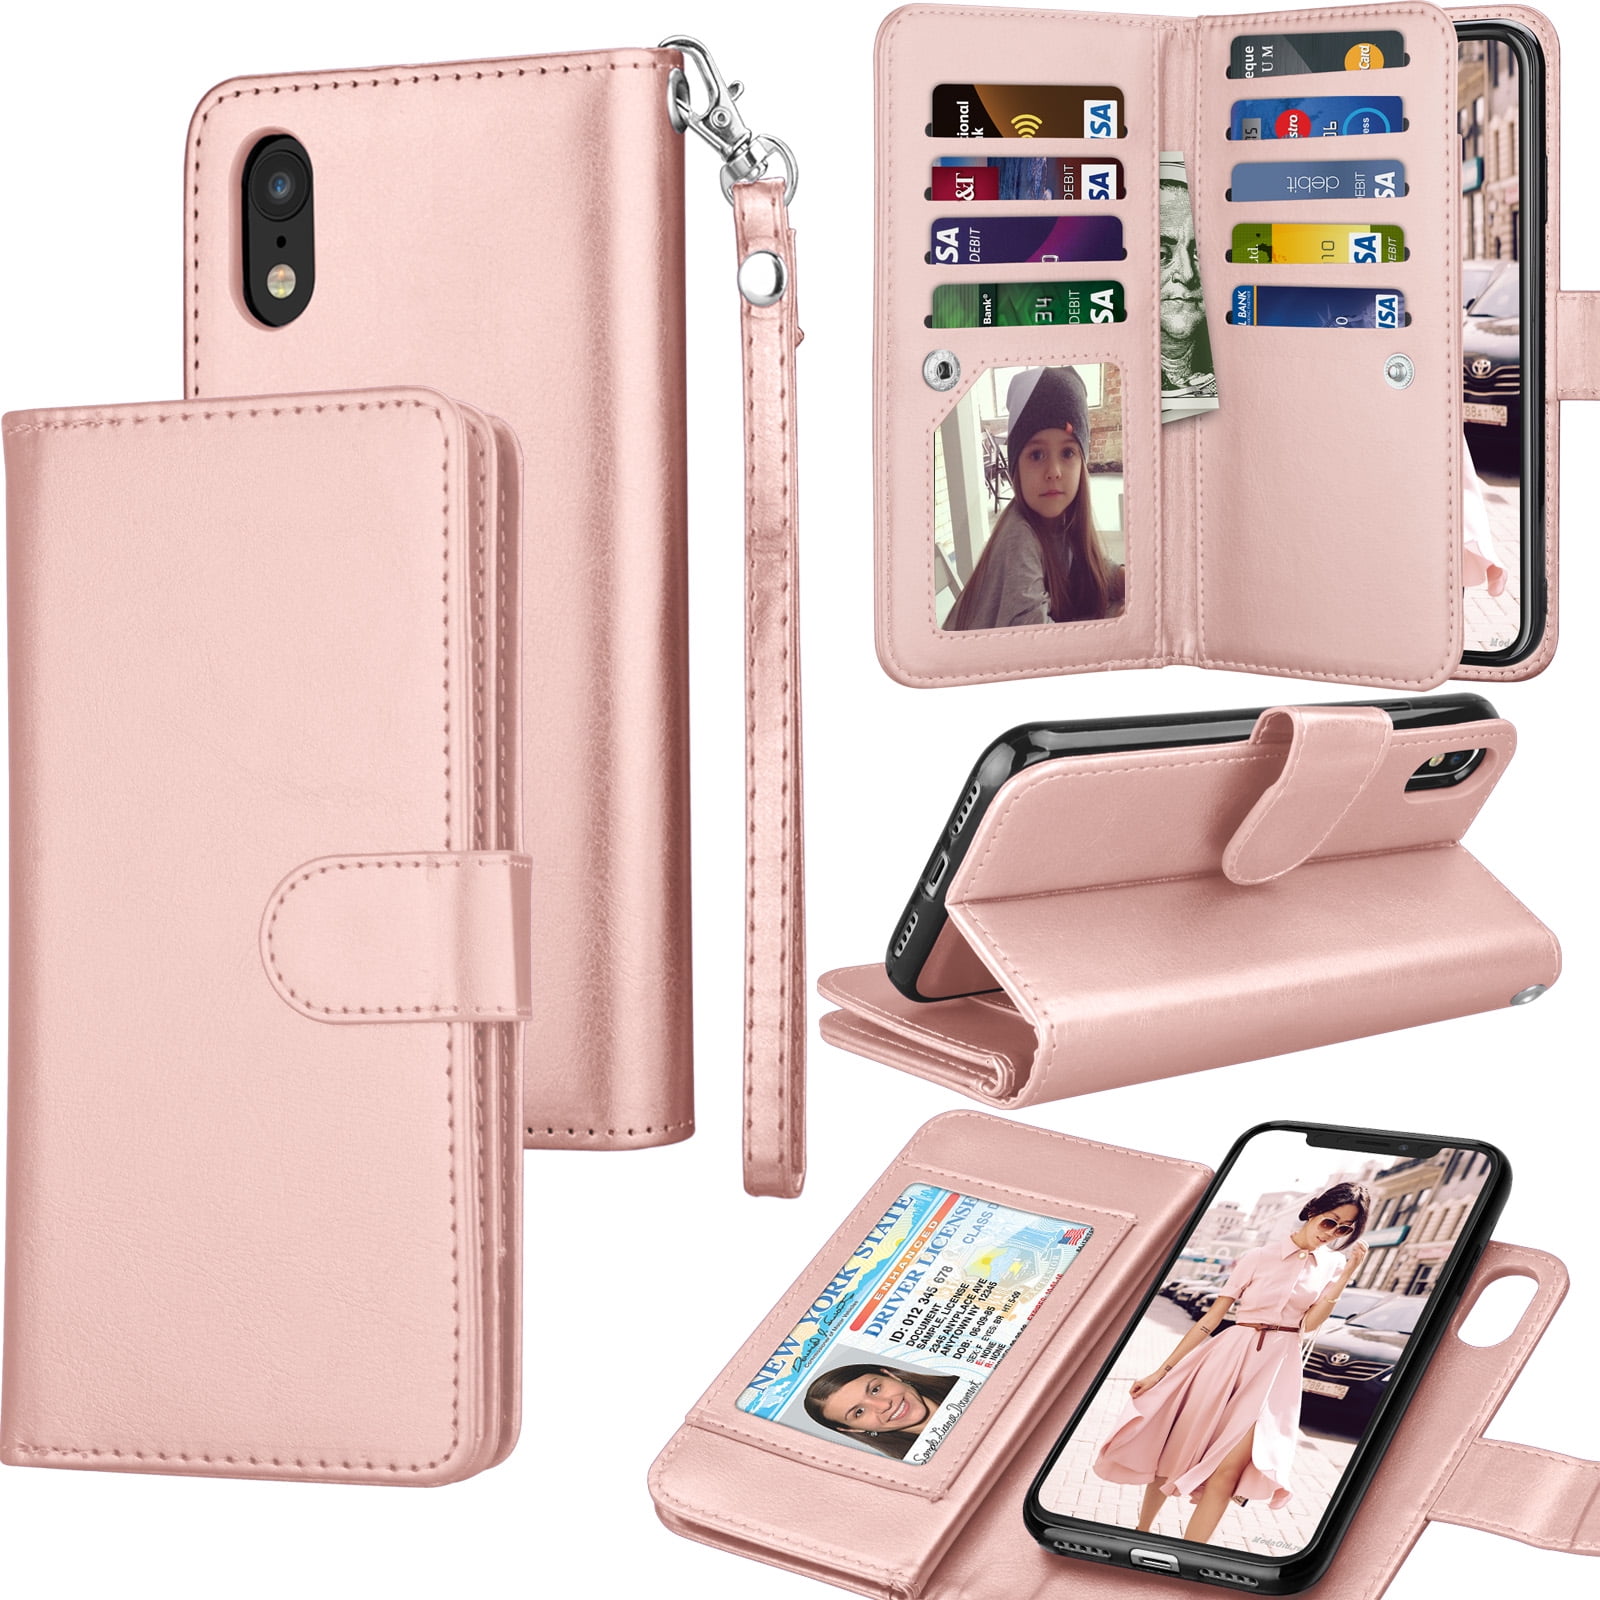 iPhone XR Flip Case Cover for iPhone XR Leather Card Holders Extra-Durable Business Kickstand Mobile Phone case with Free Waterproof-Bag